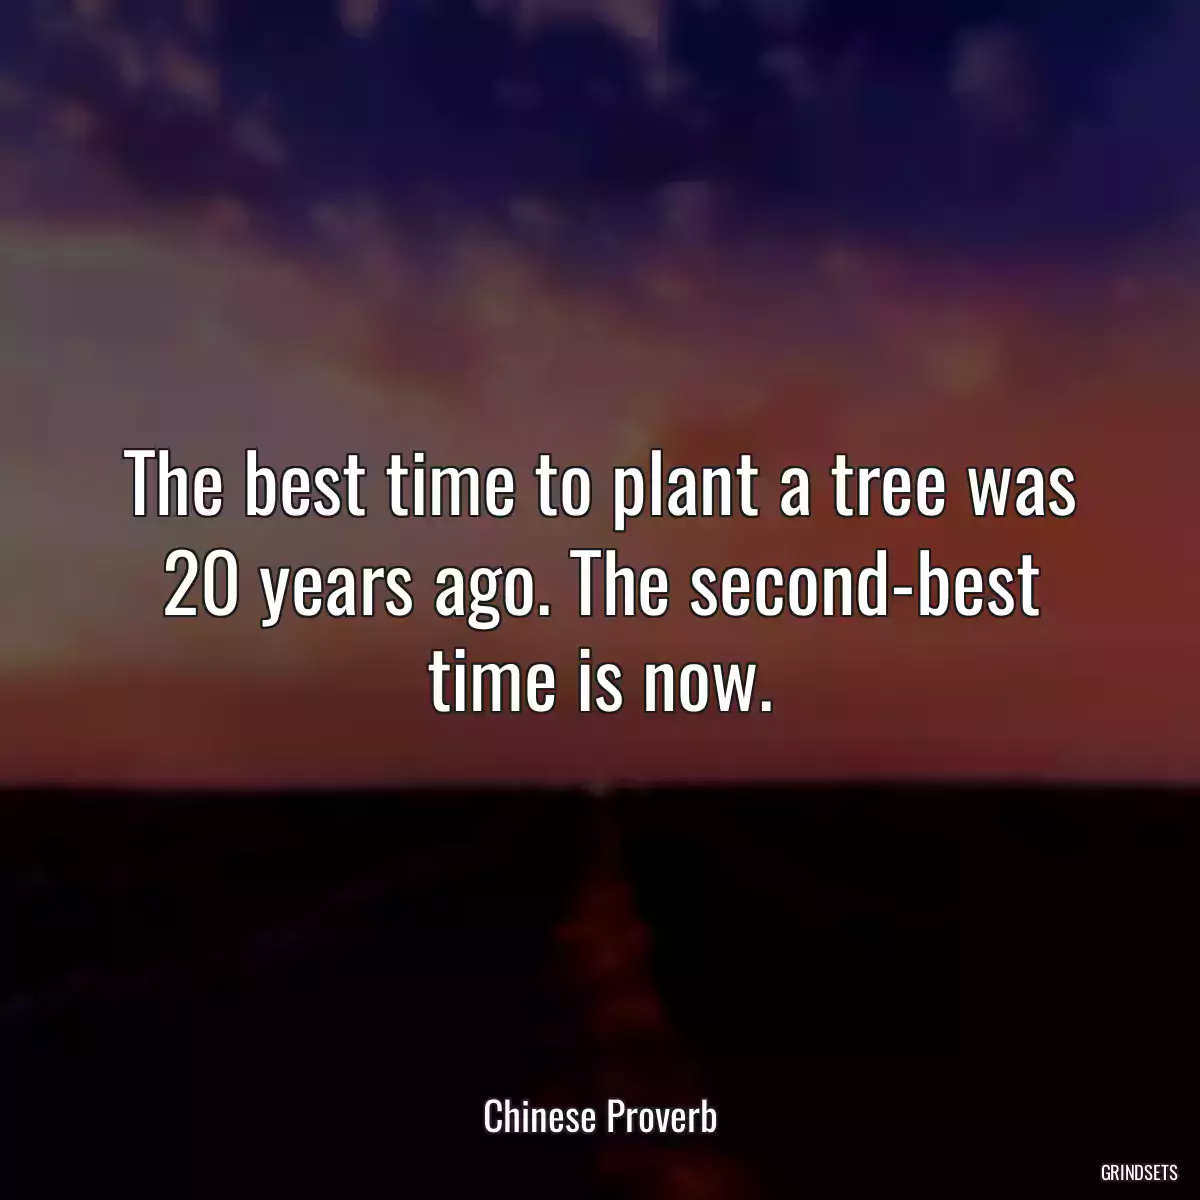 The best time to plant a tree was 20 years ago. The second-best time is now.